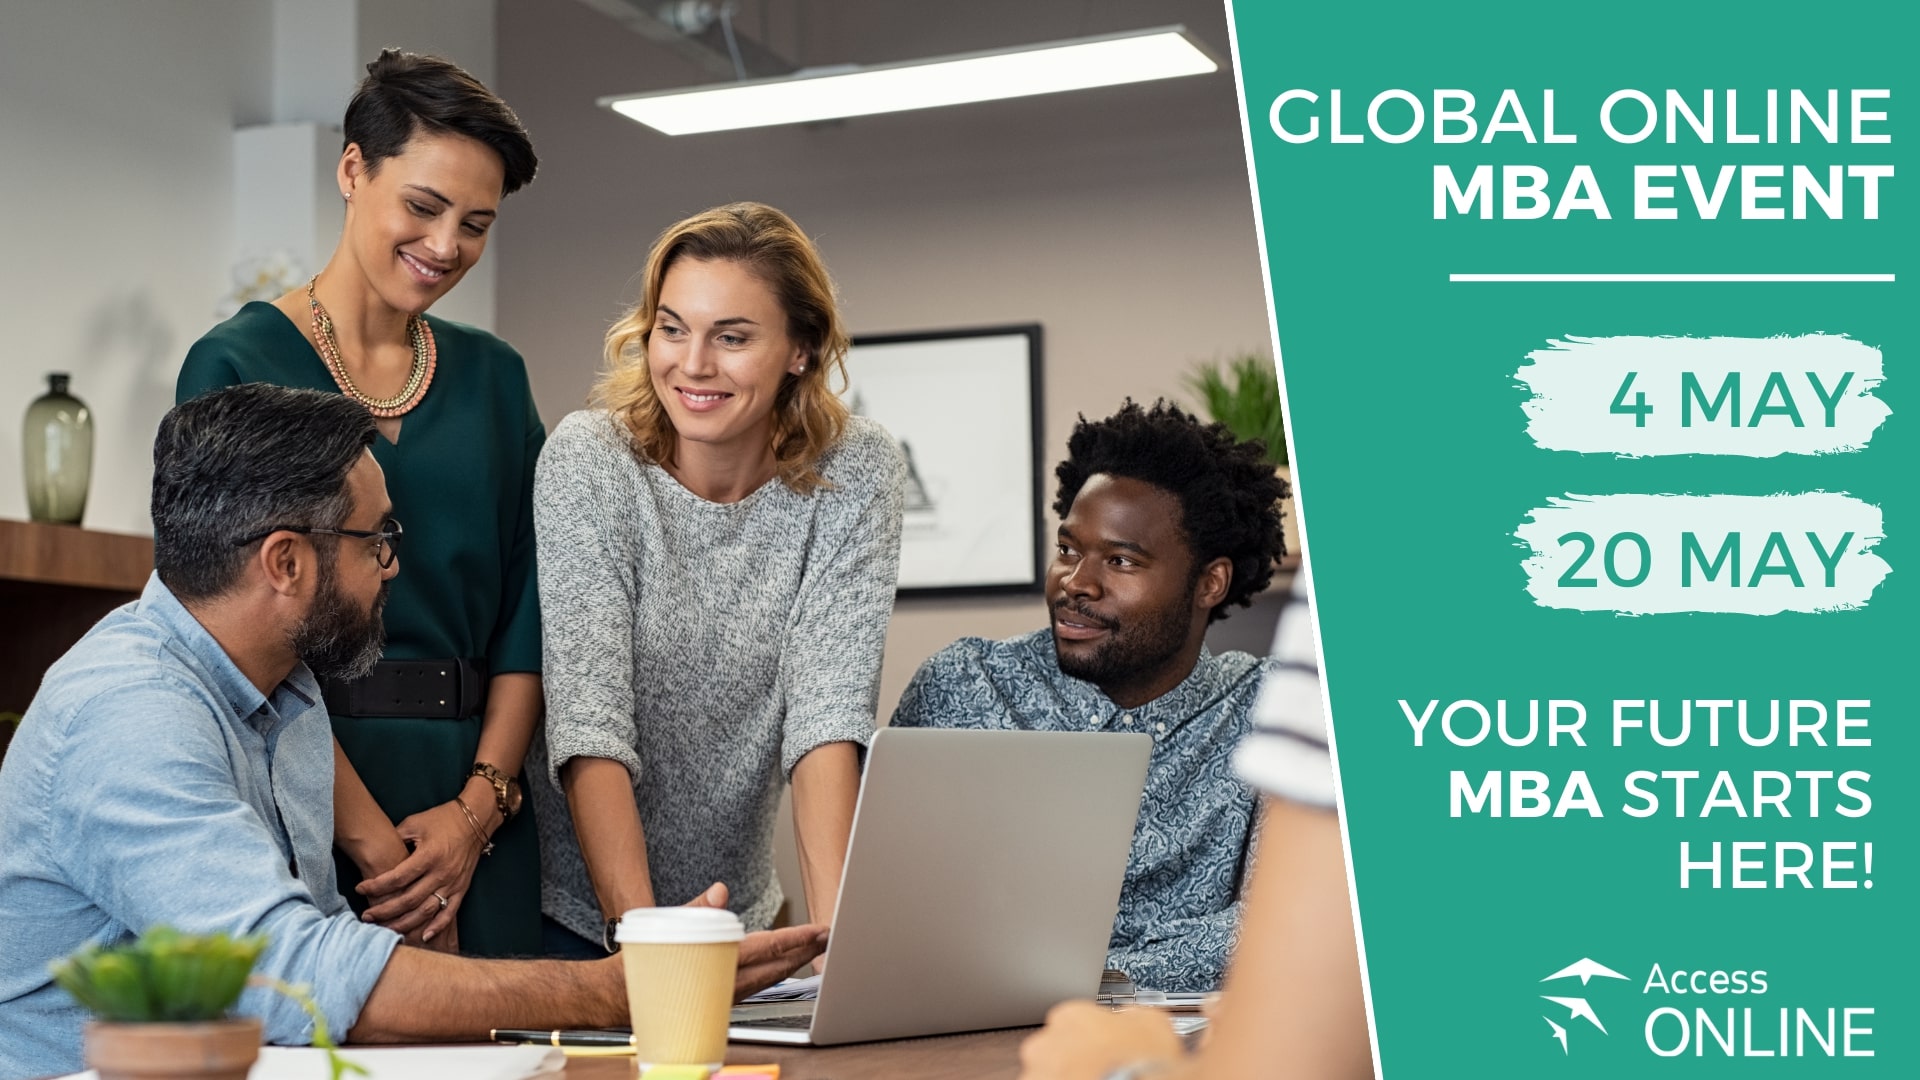 Unlock Your Potential with the Access Online Global MBA Event, Online Event